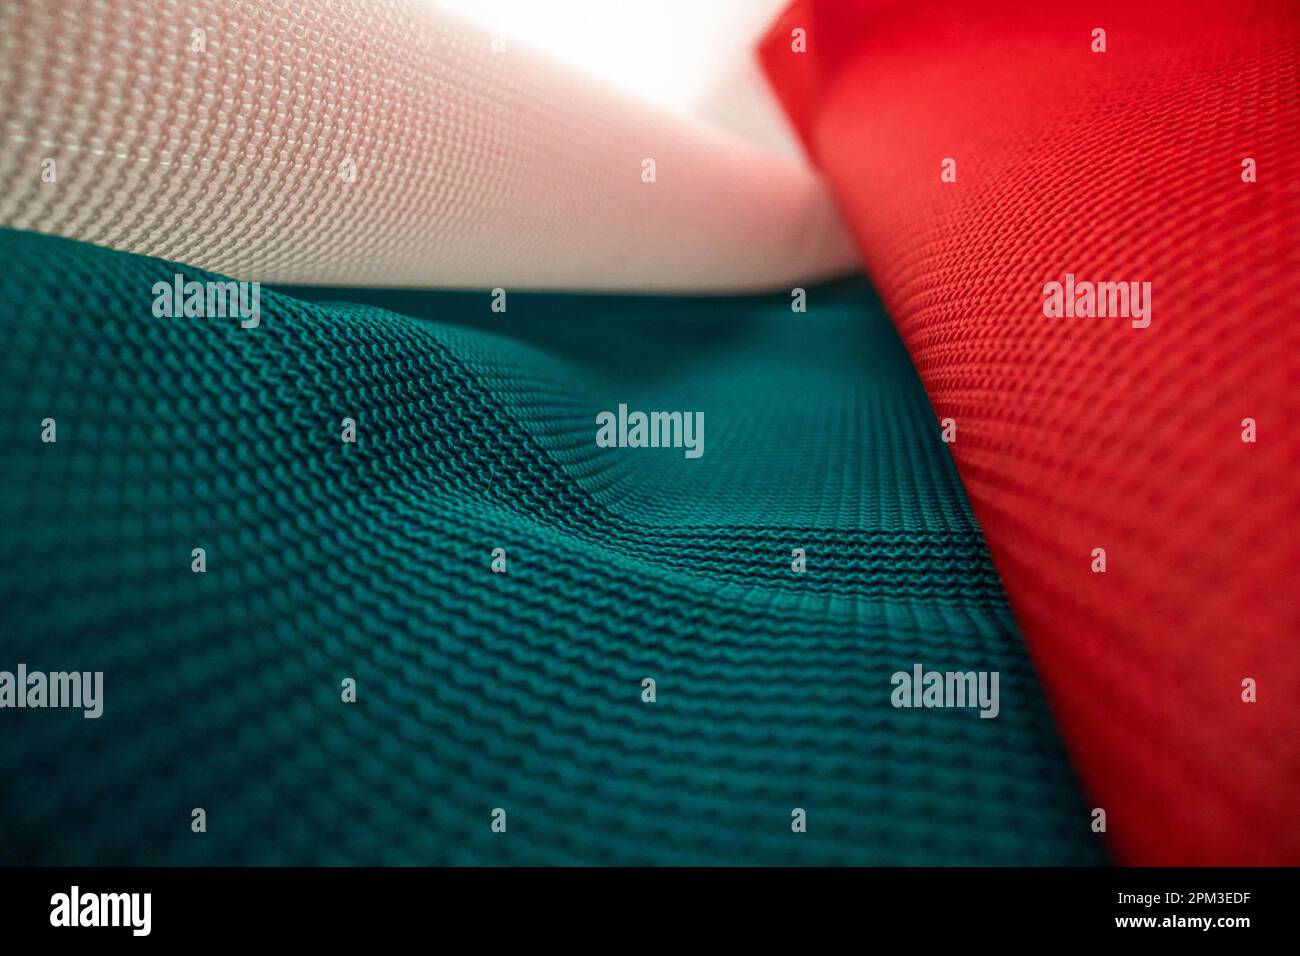 Macro view of the Italy flag material and its weaving pattern. Flag, country, patriotic Stock Photo